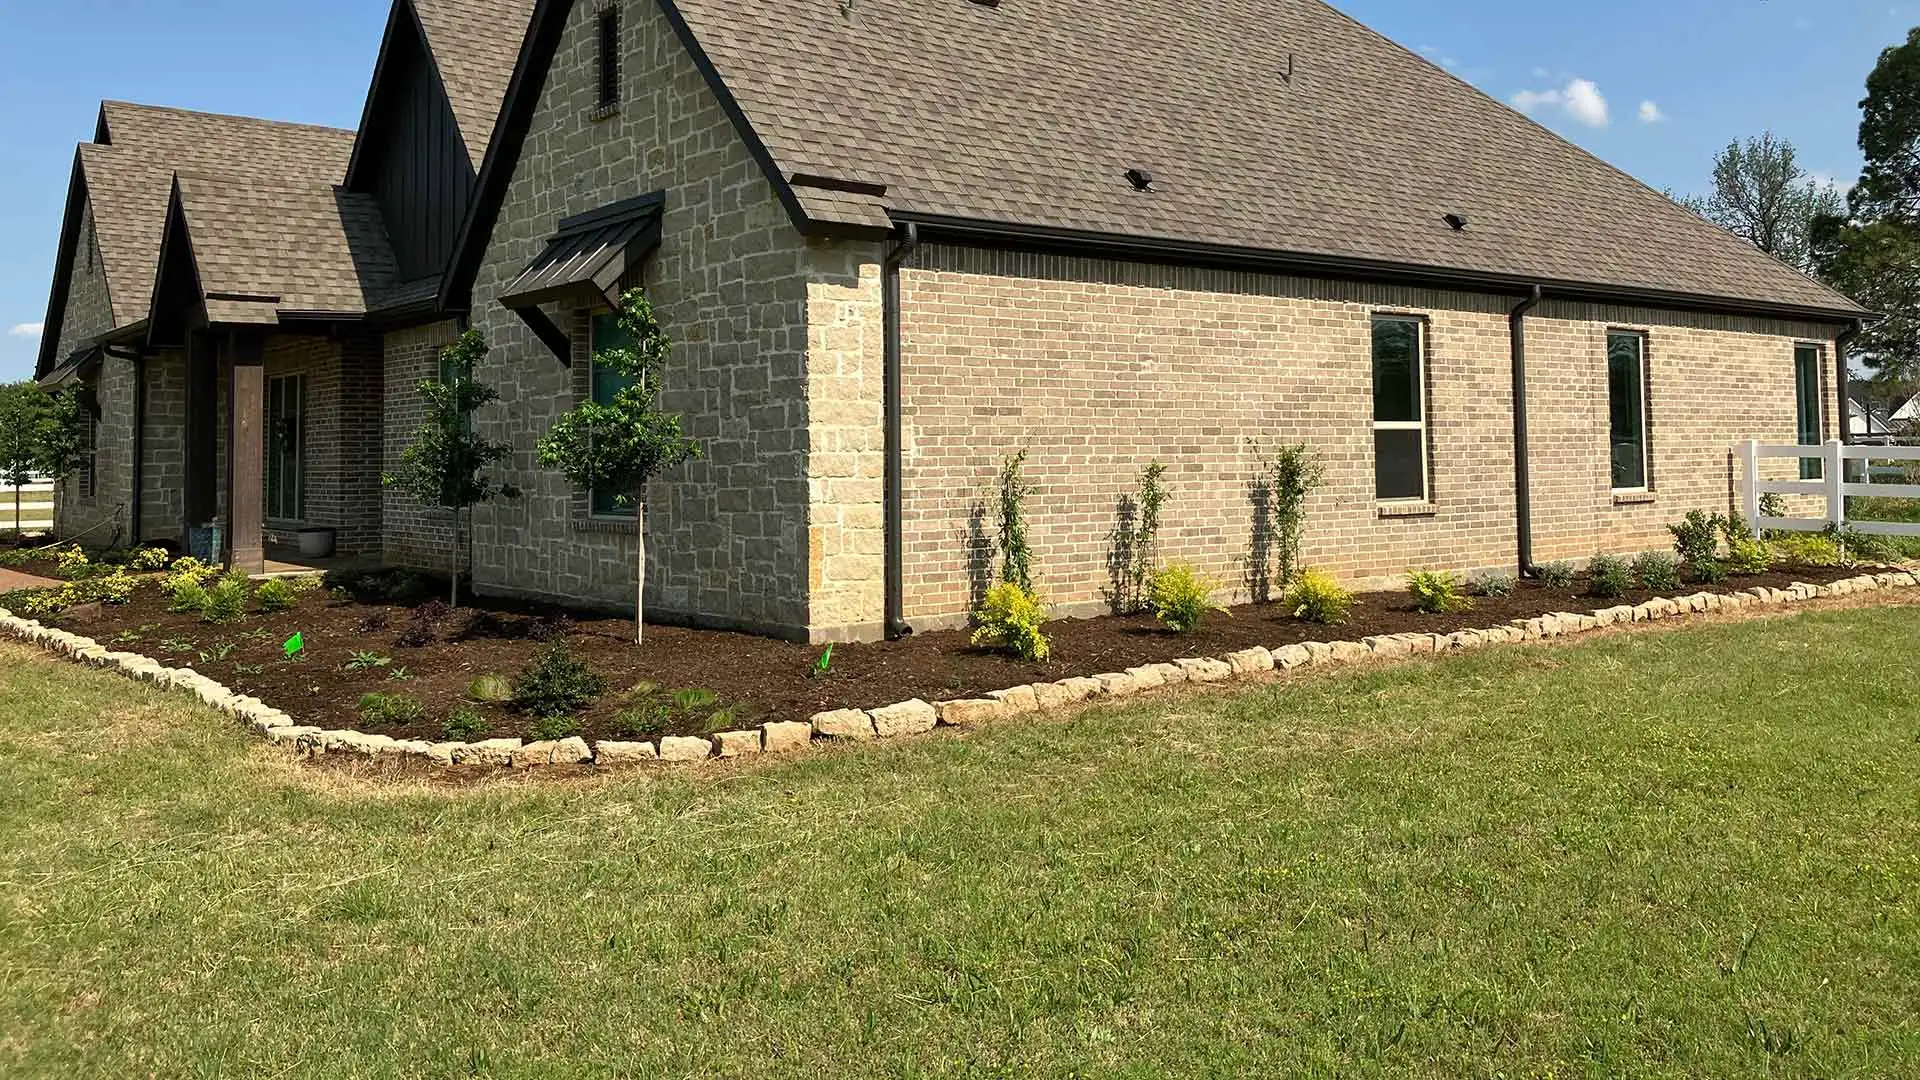 Maintained lawn after cleanup service in Northlake, TX.